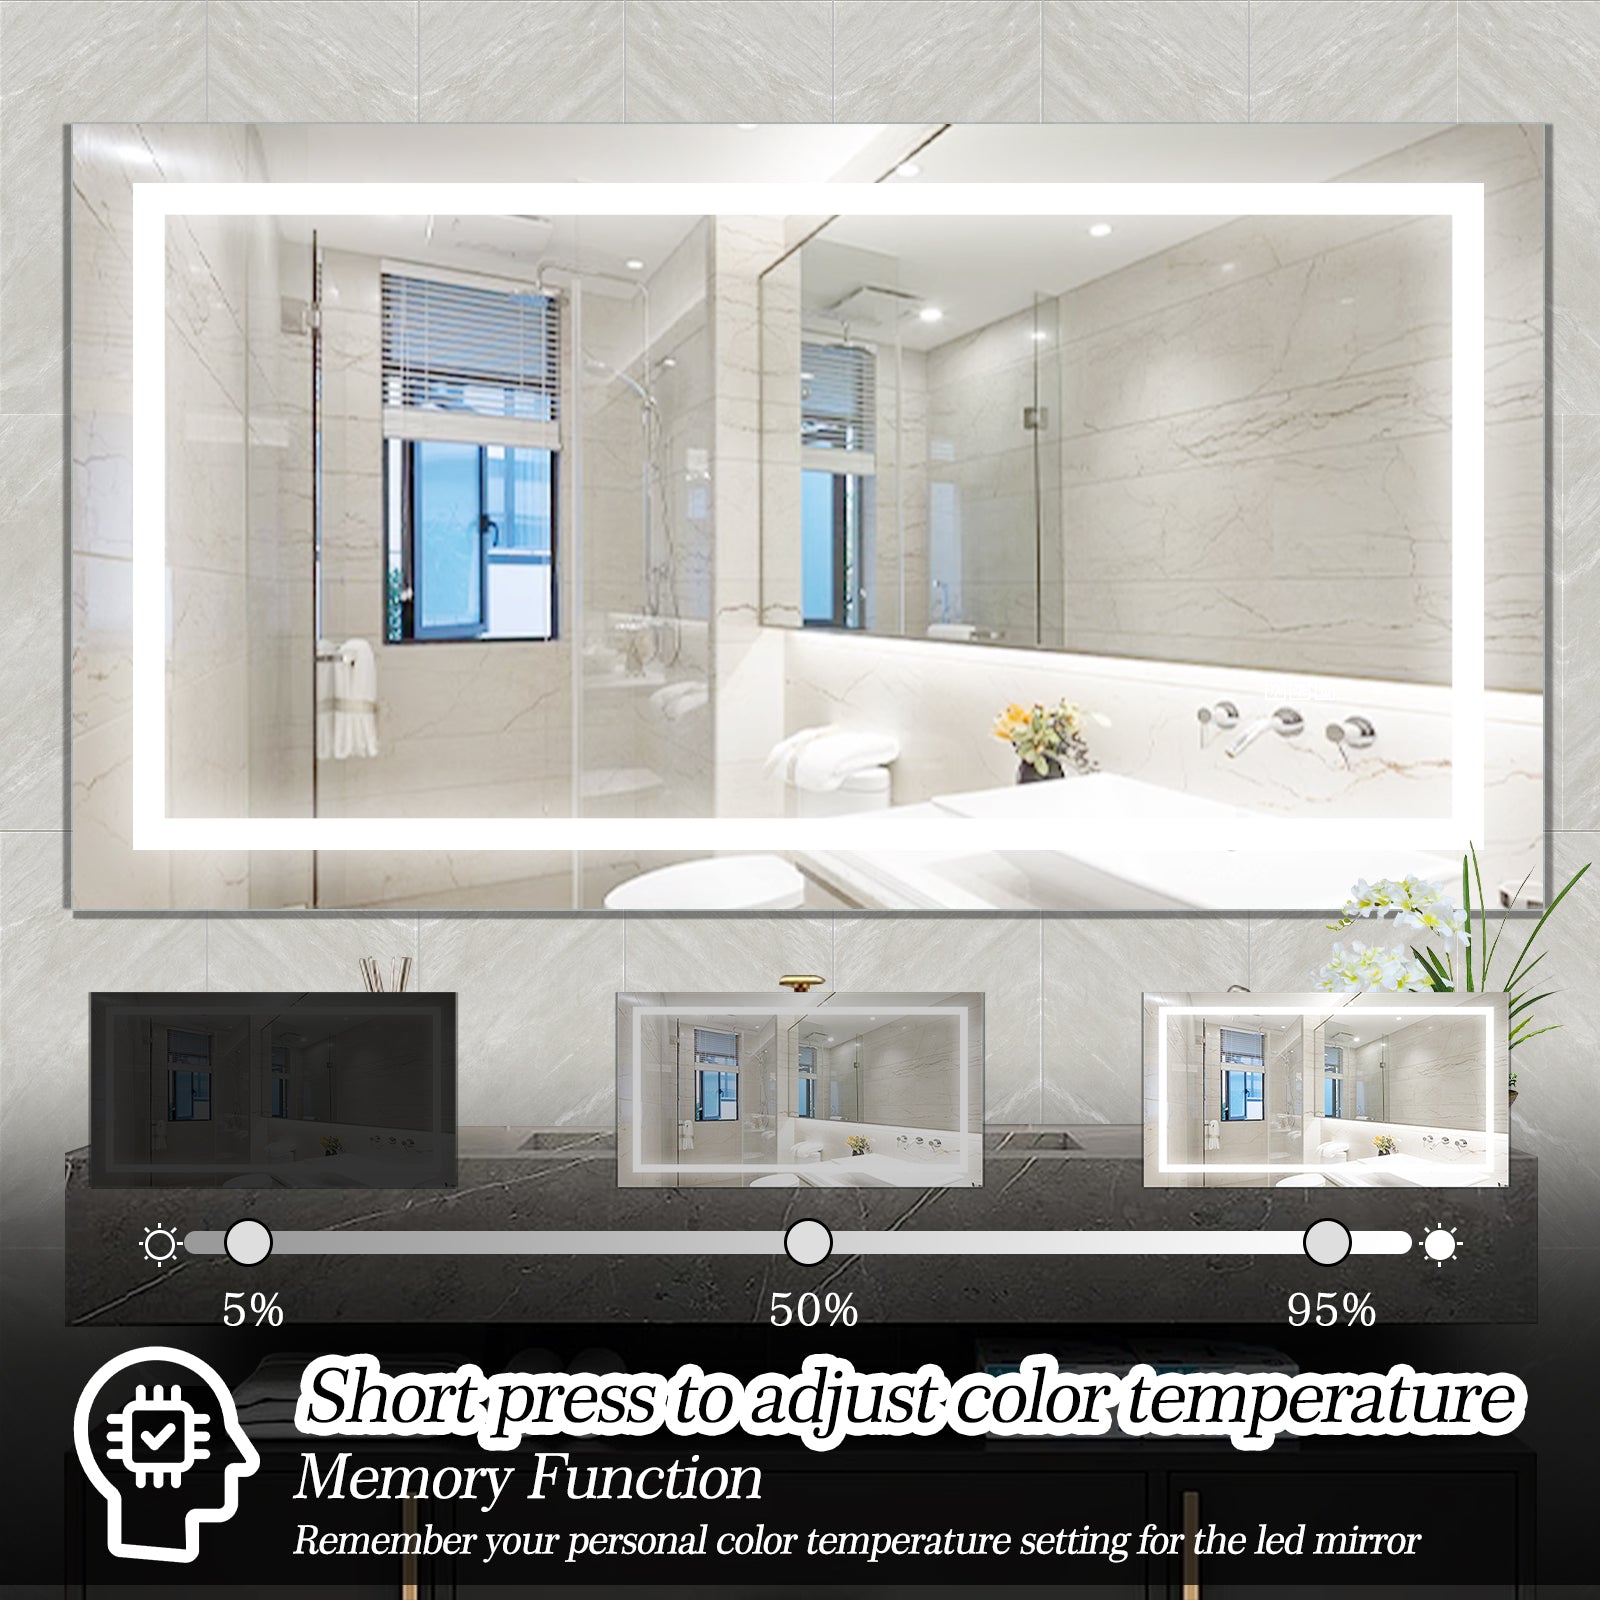 60" x 32" LED Bathroom Vanity Mirror with Touch Control Anti-Fog & Dimming